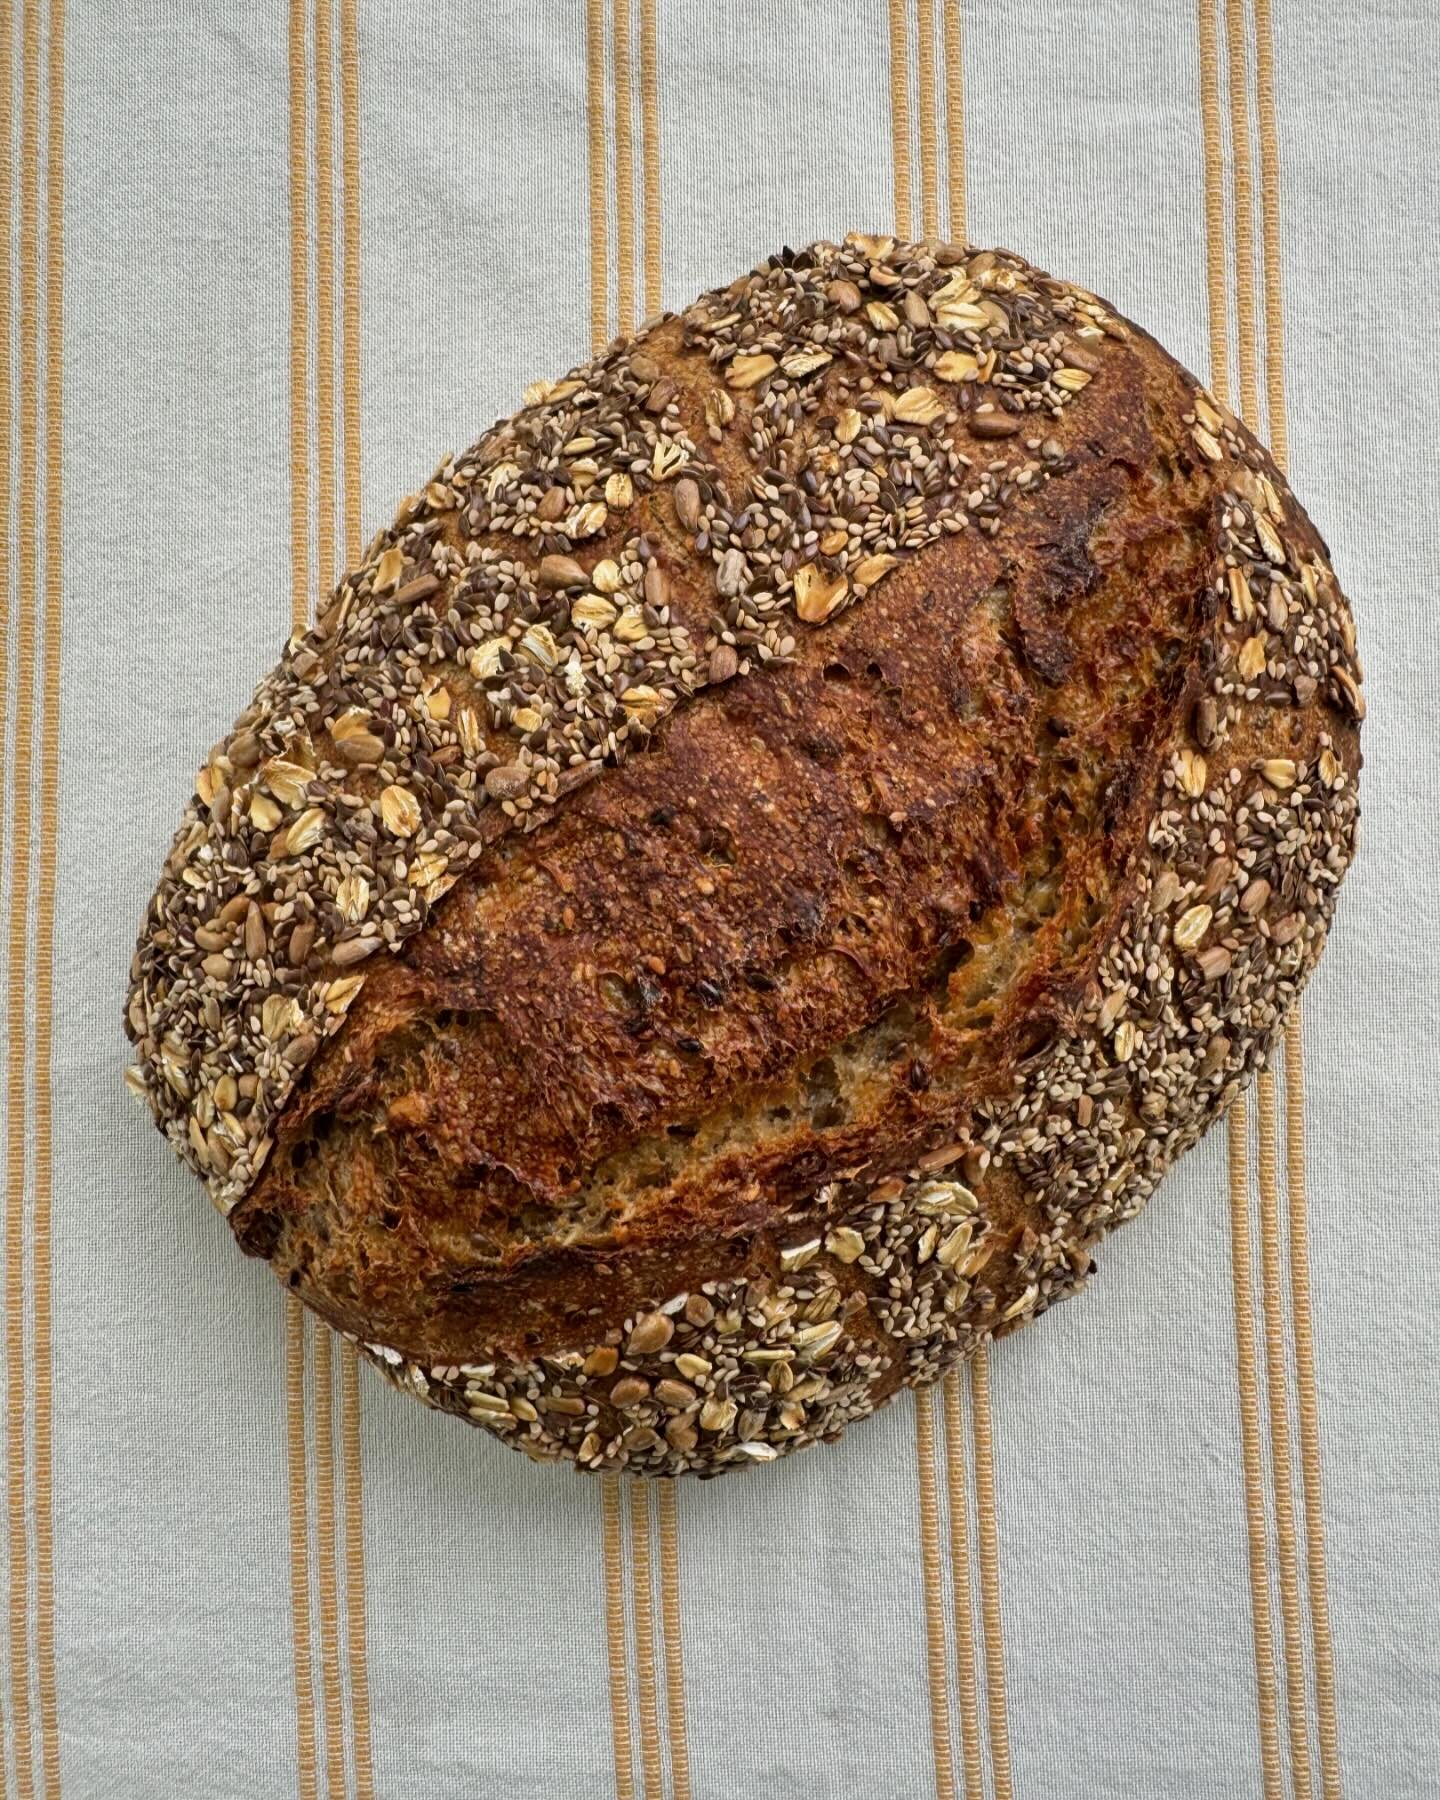 Pop-up today! Our Country Seeded loaf is packed with wholesome goodness. It starts with adding organic oats to our naturally leavened levain dough then each loaf gets a dusting of organic flax, sesame &amp; sunflower seeds. Delicious!